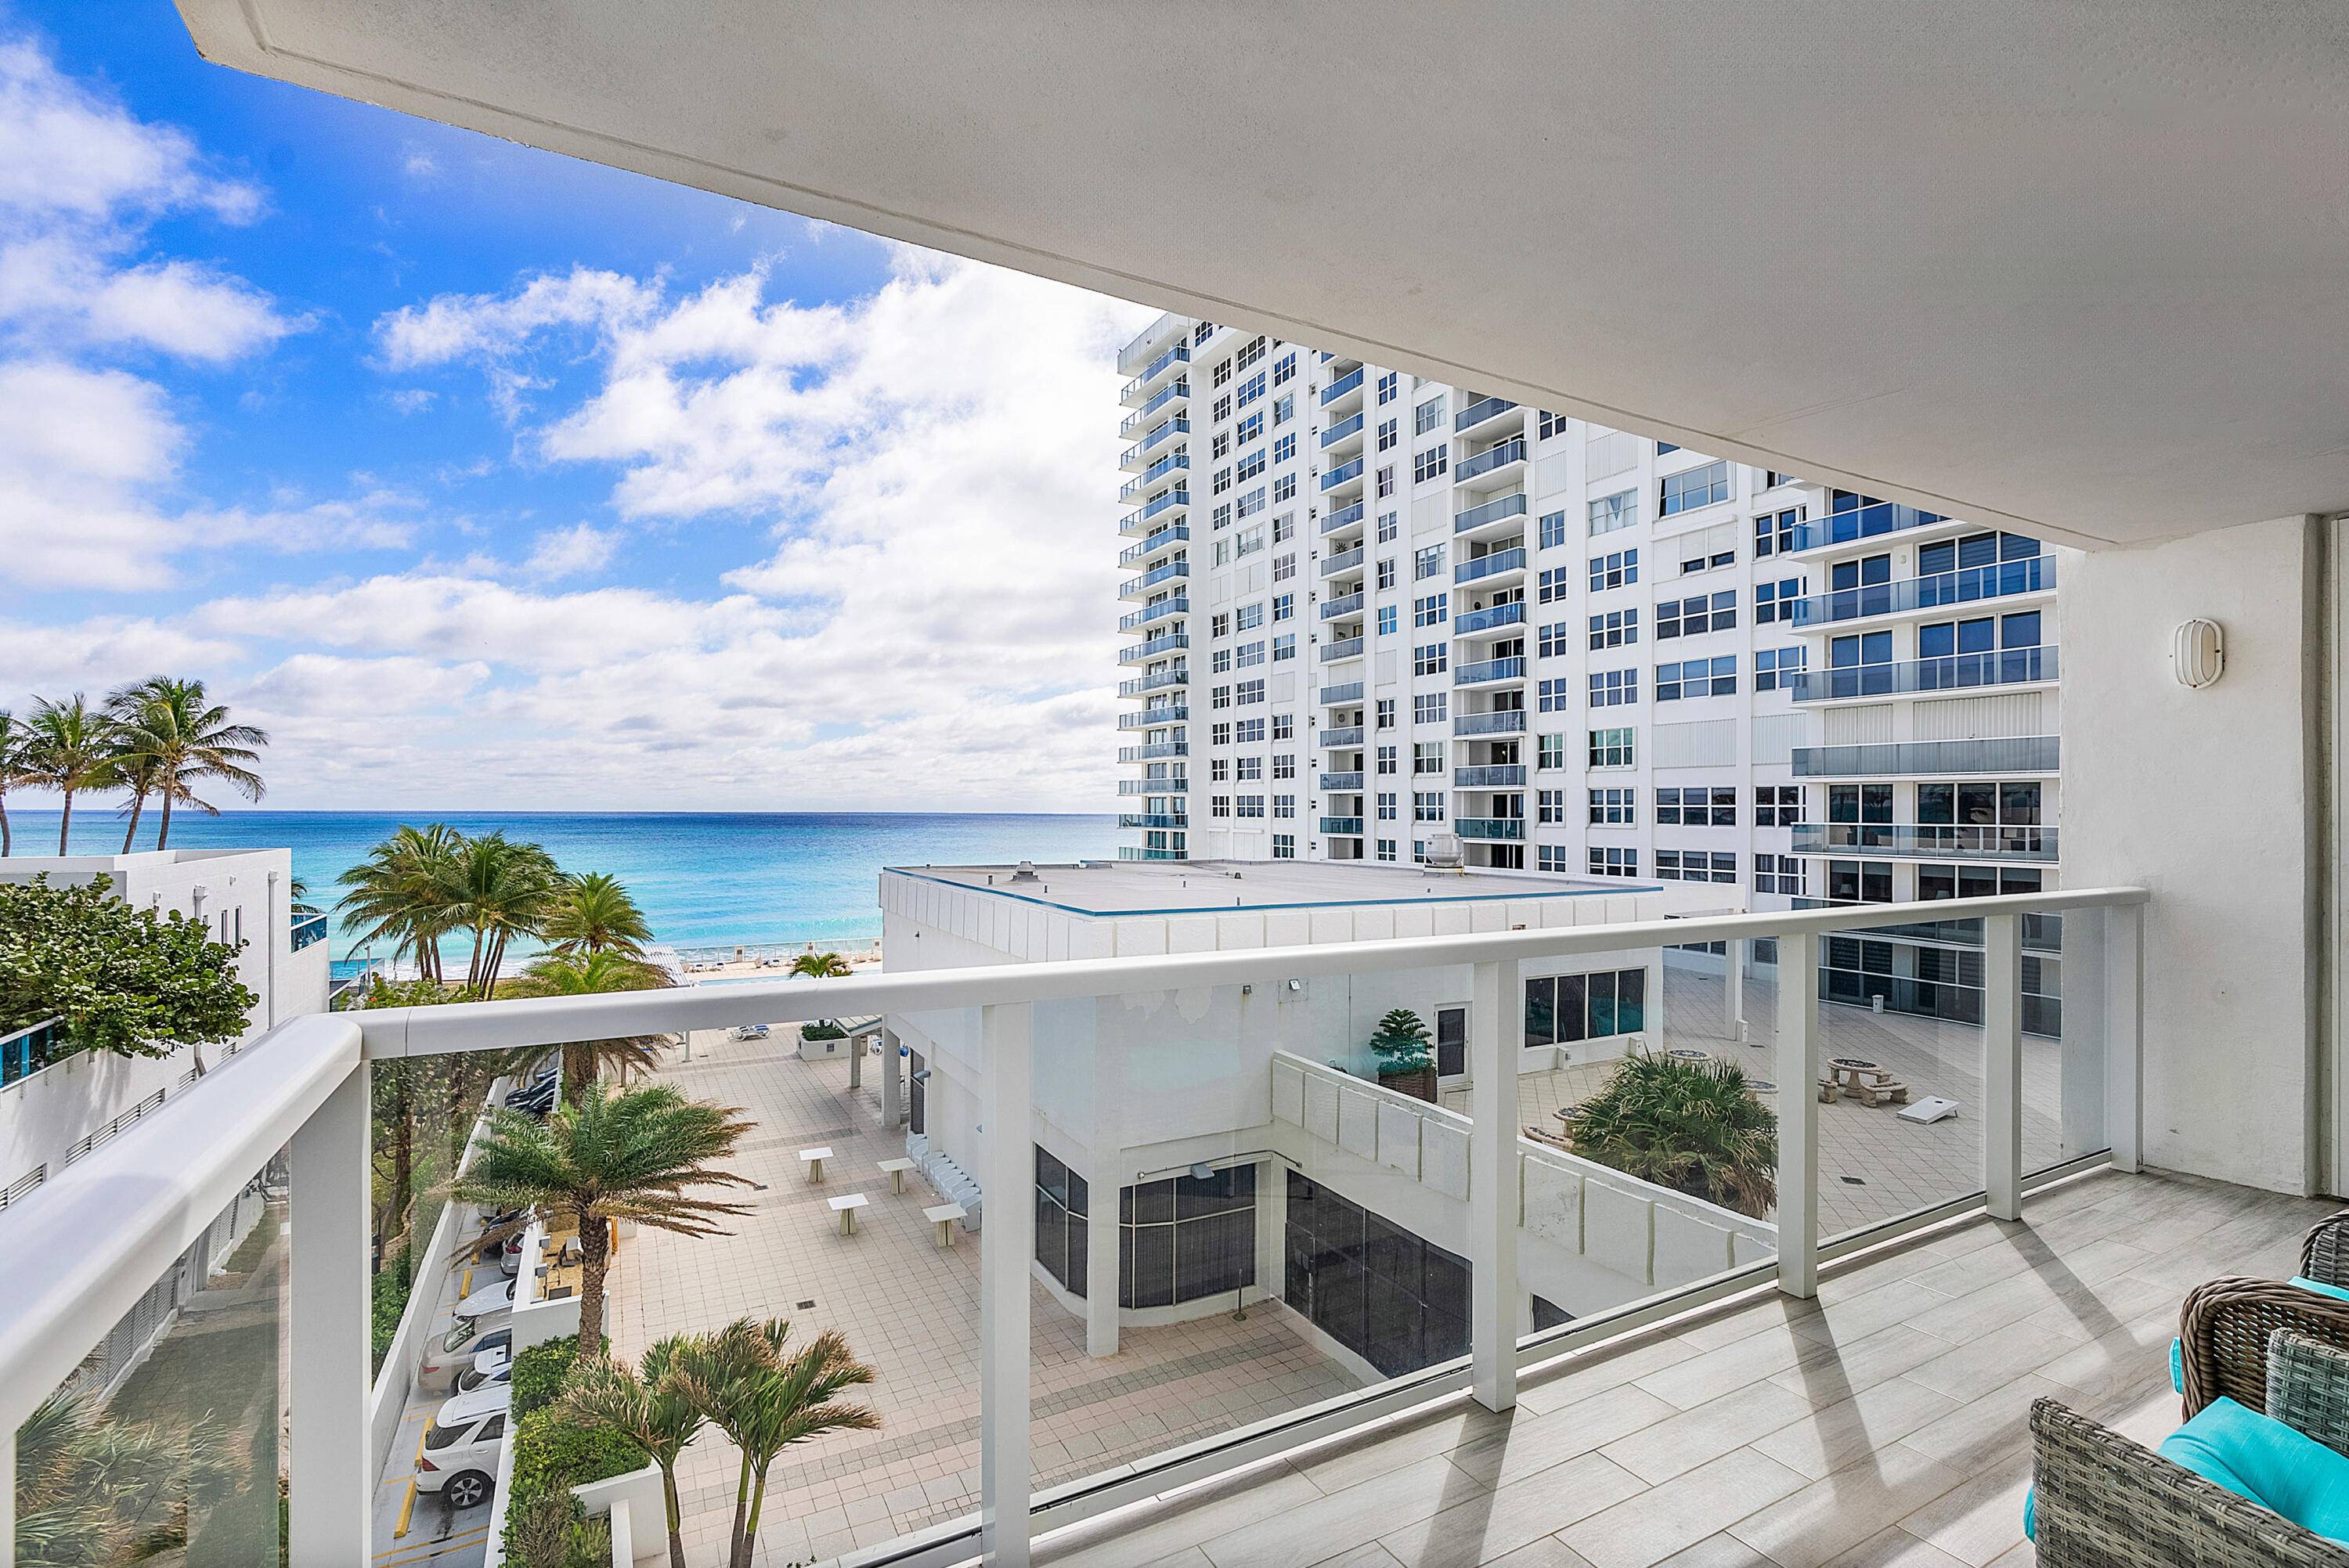 Discover unparalleled coastal living in this magnificent oceanfront furnished 2 bedroom, 2 bathroom condo at The Aquarius.